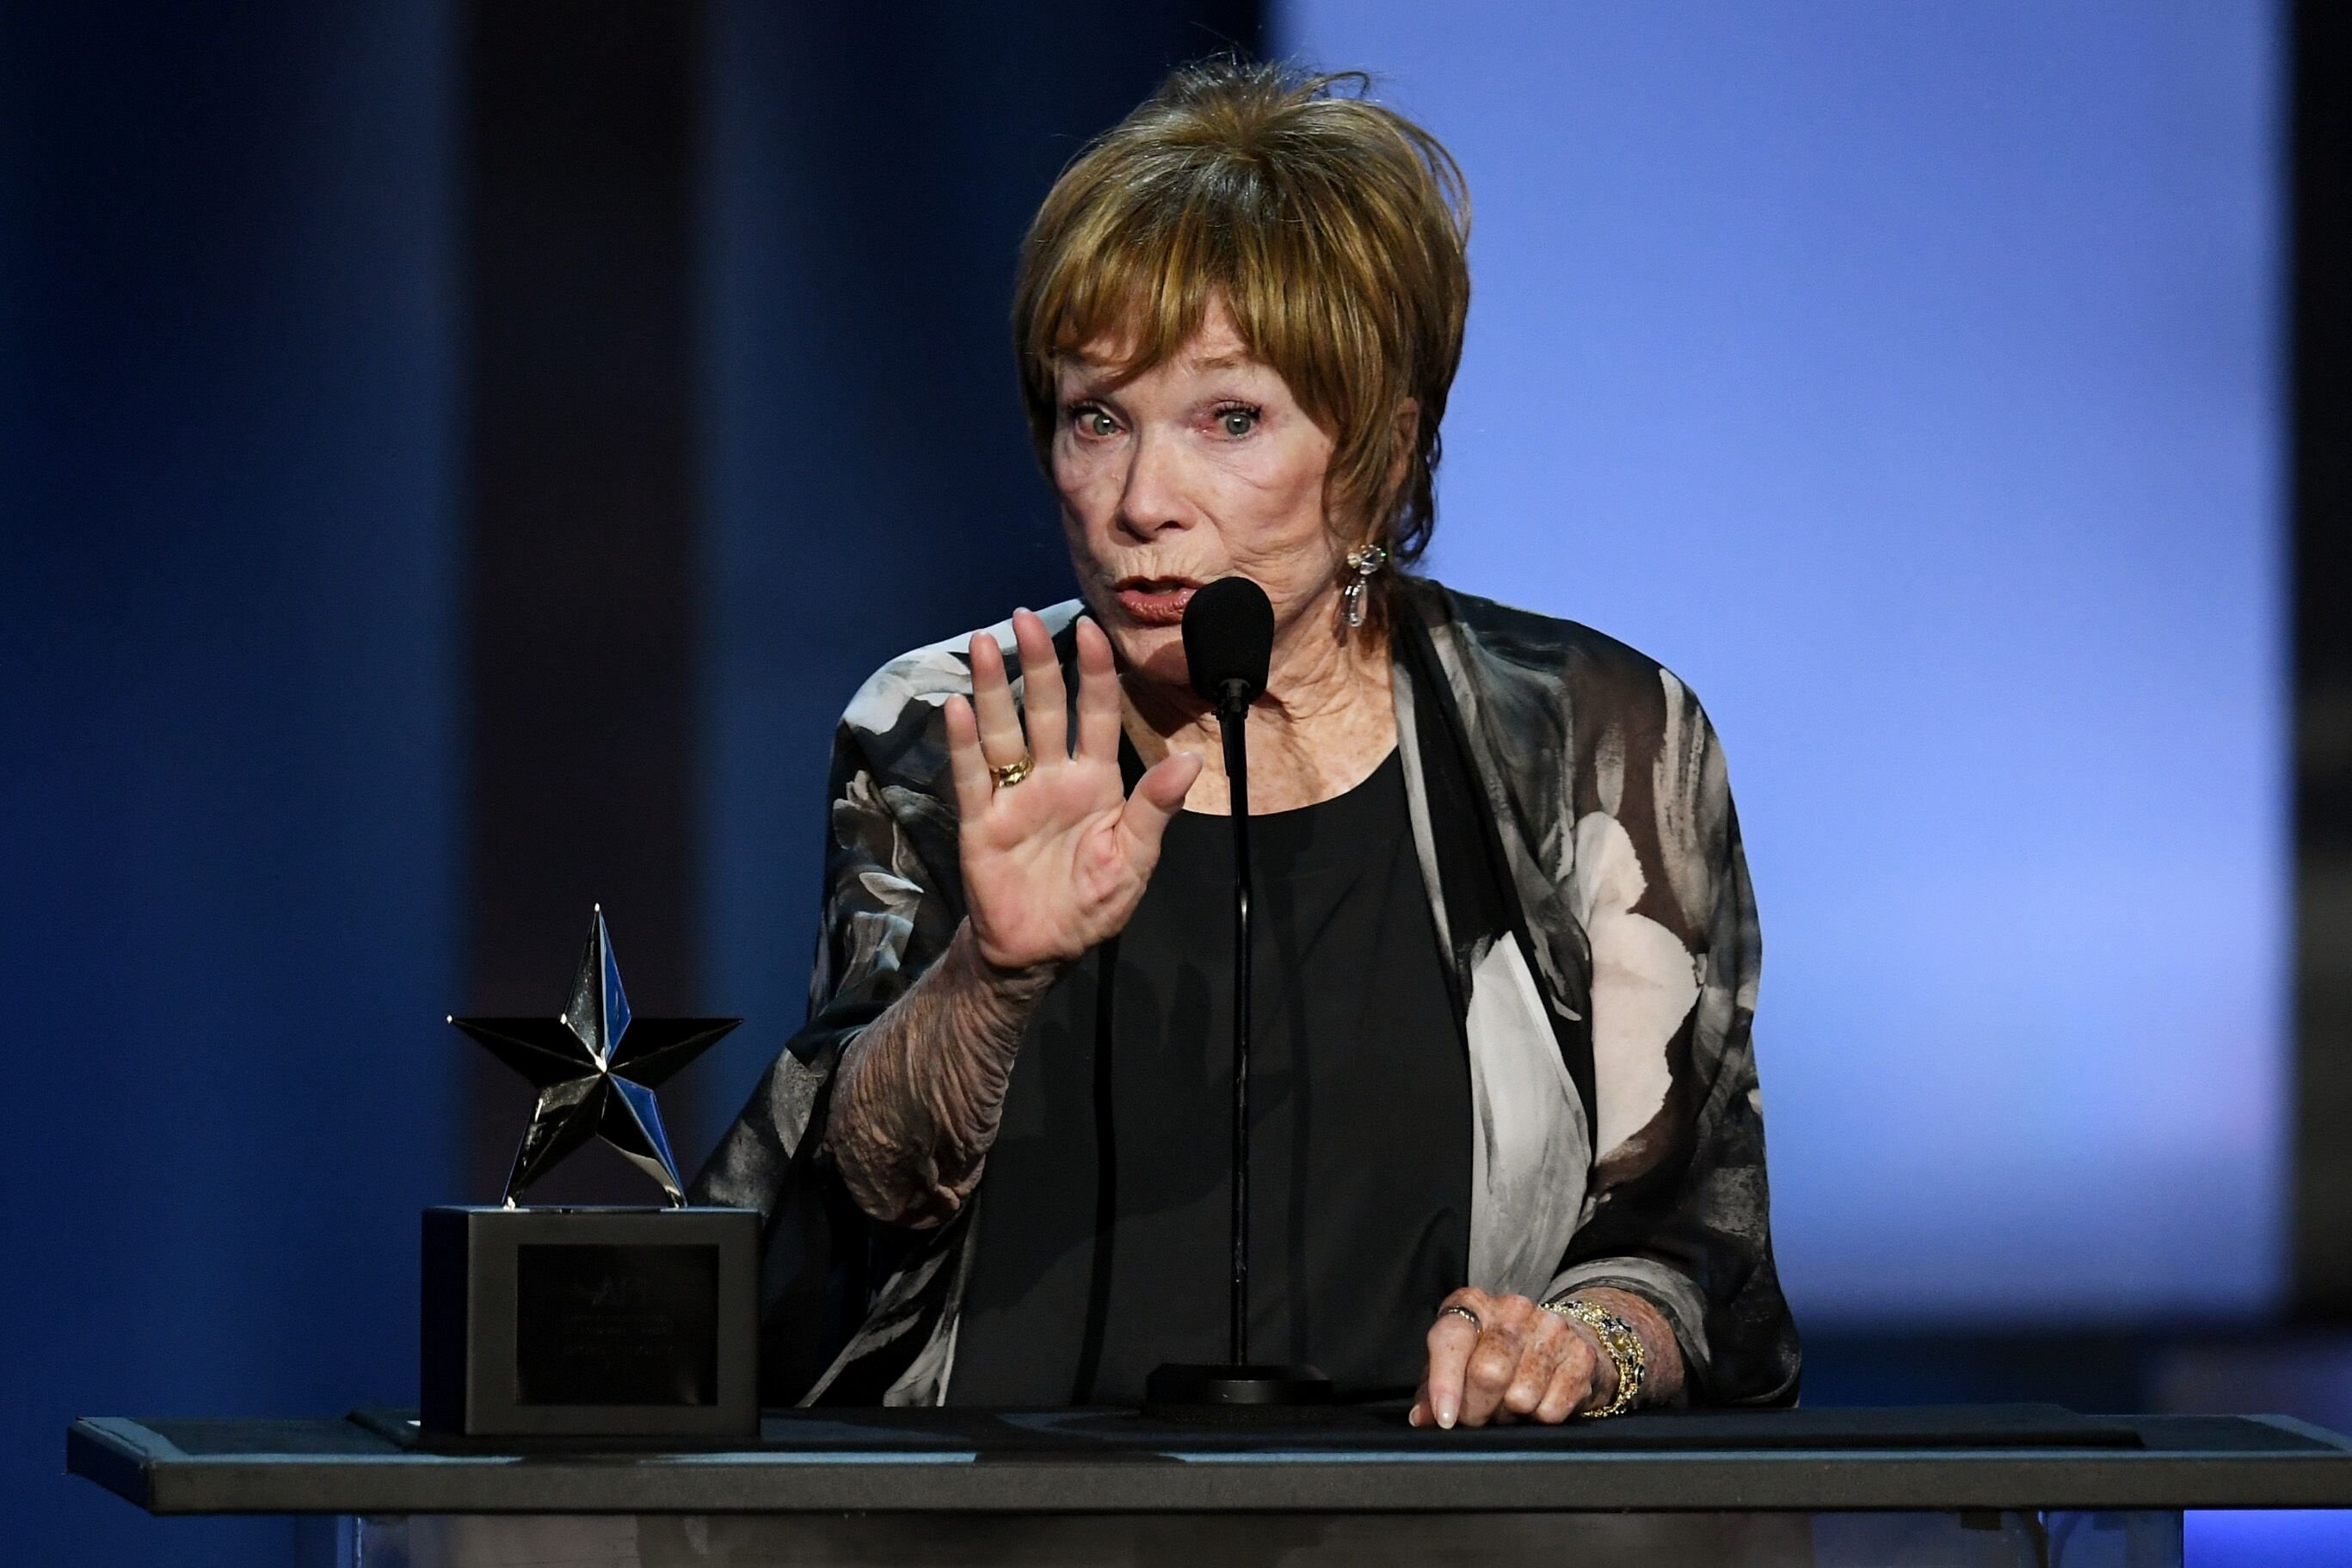 Shirley MacLaine during the American Film Institute's 46th Life Achievement Award Gala. | Source: Getty Images